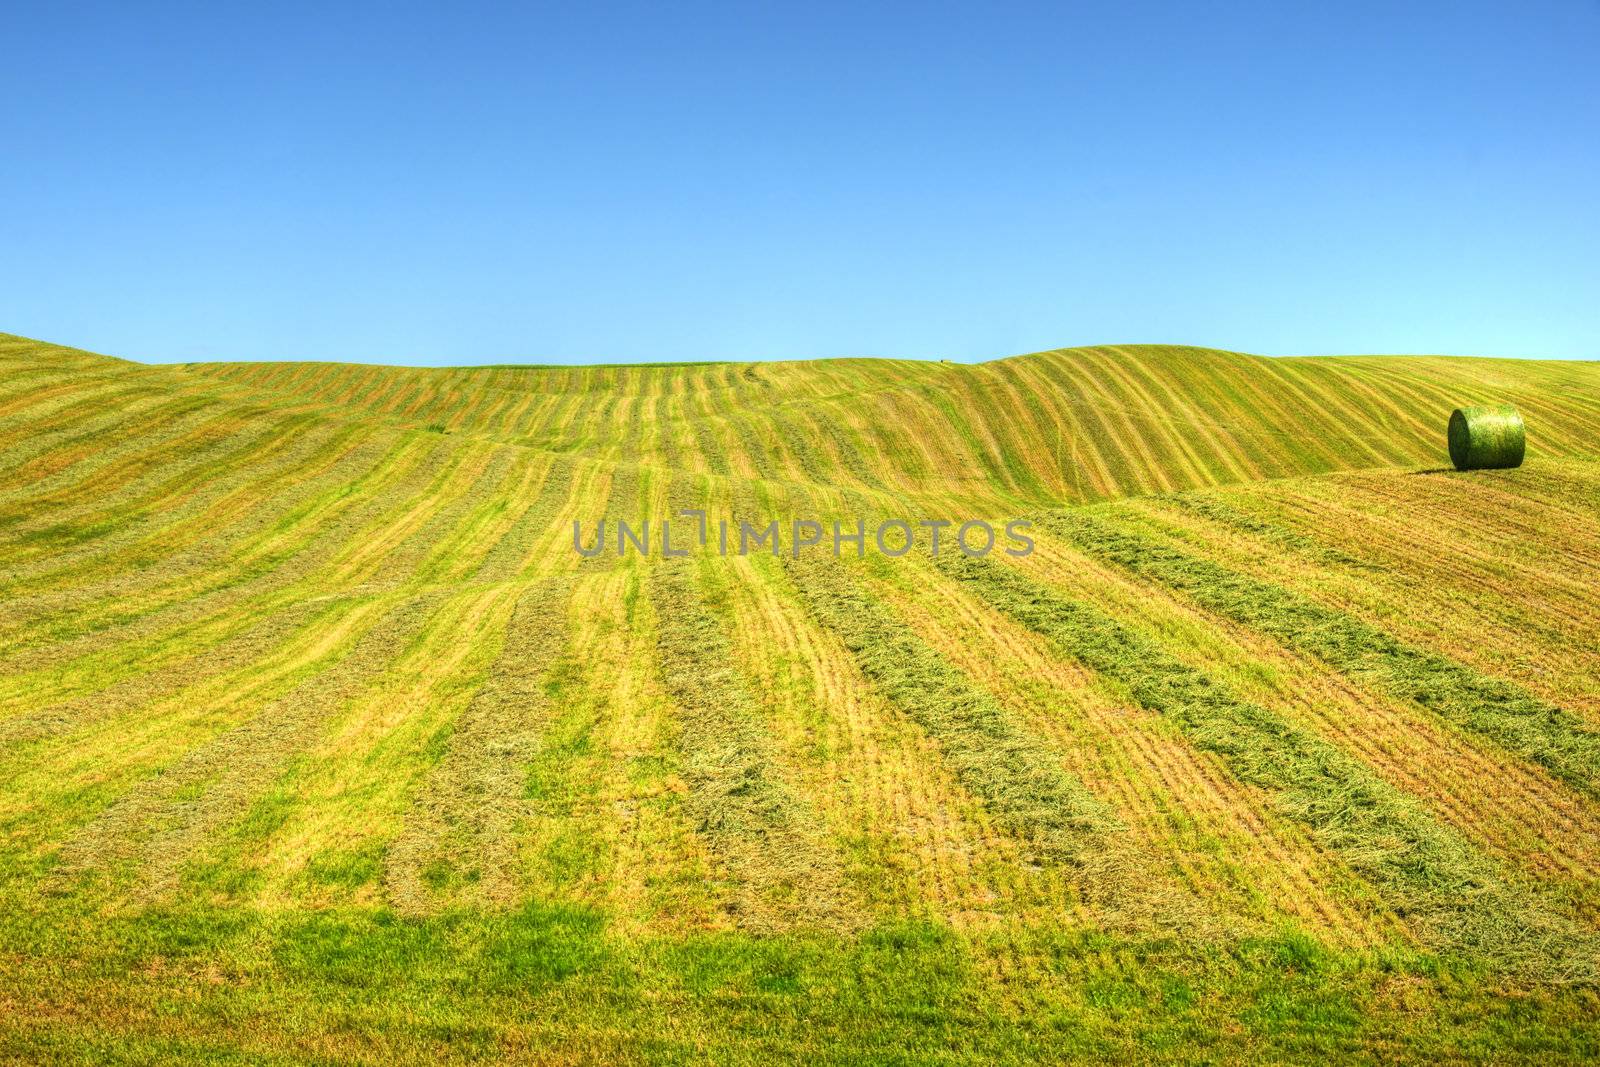 Beautiful hdr agricultural landscape: patterns in the newly swathed field with one hay bale over the gentle hills.